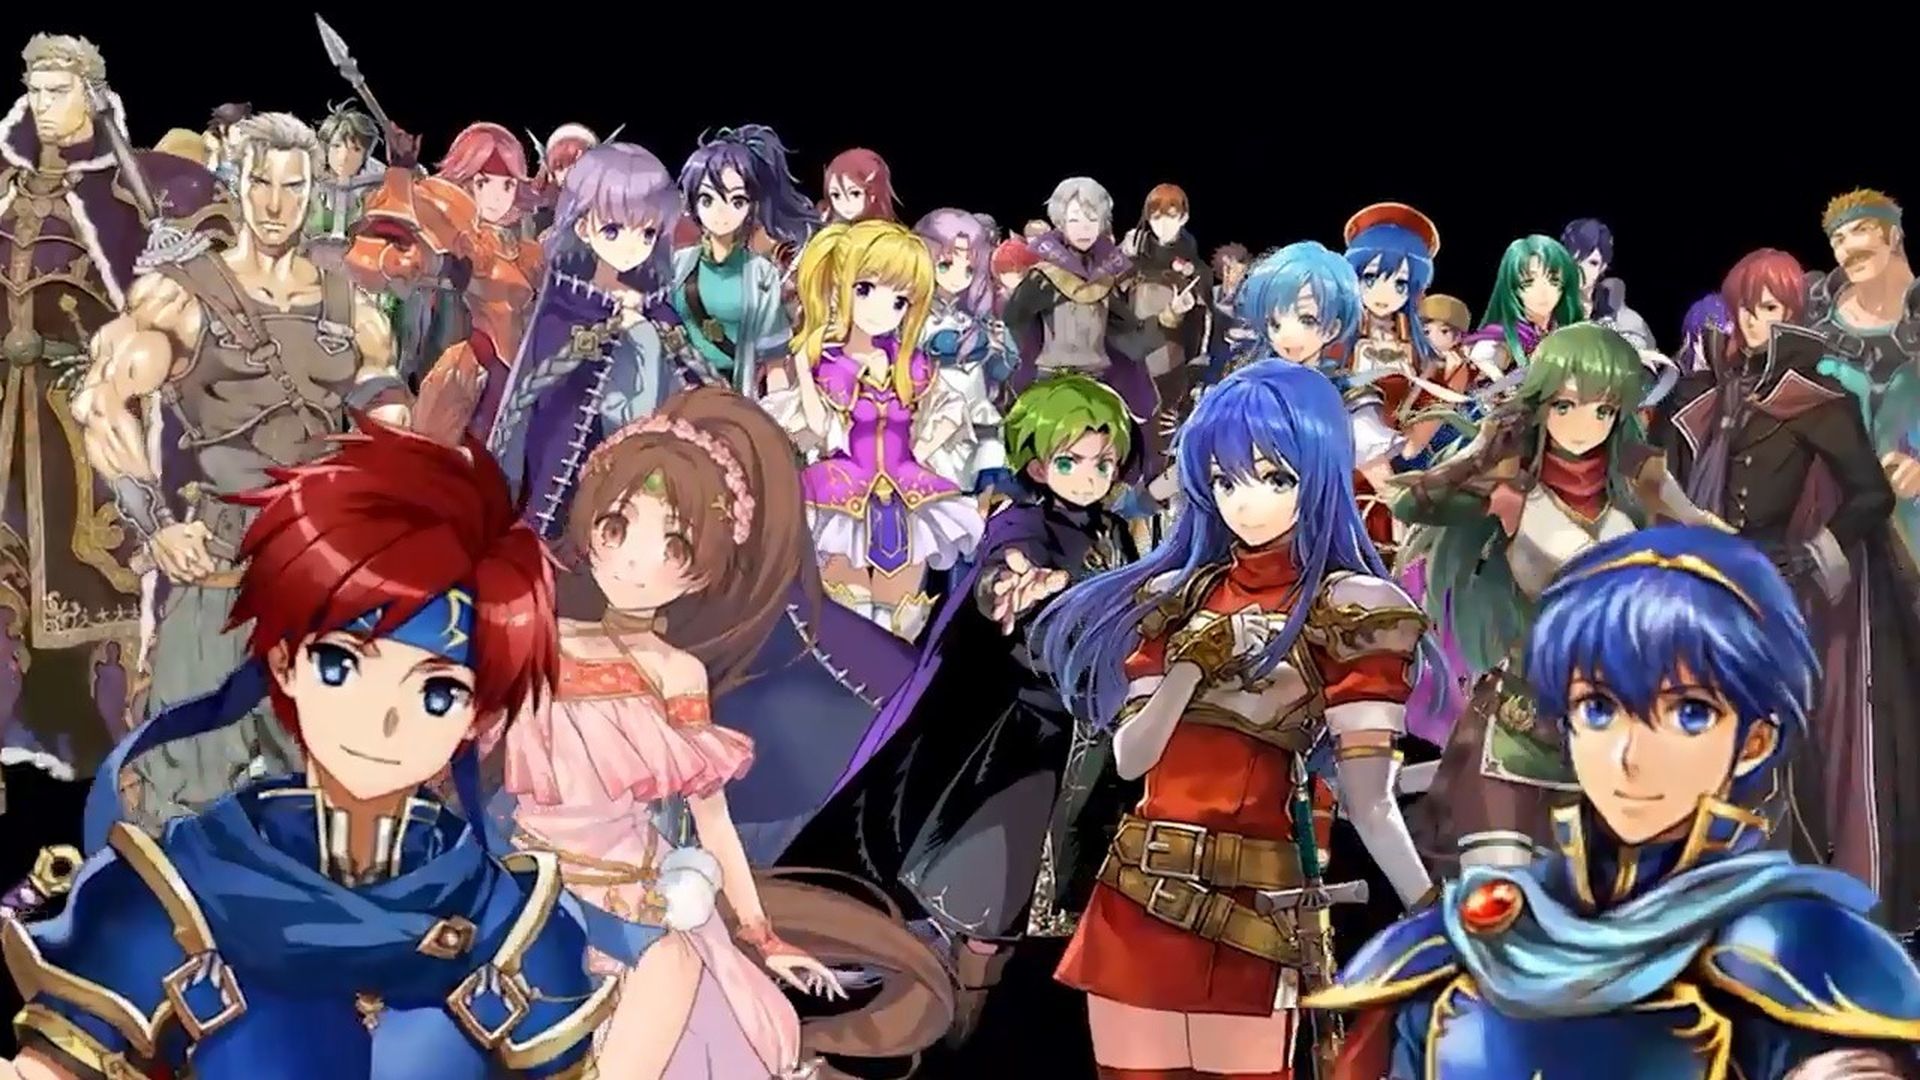 Fire Emblem Heroes is one of the best mobile games of Nintendo, take a look at our FE Heroes tier list to create the strongest rosters!